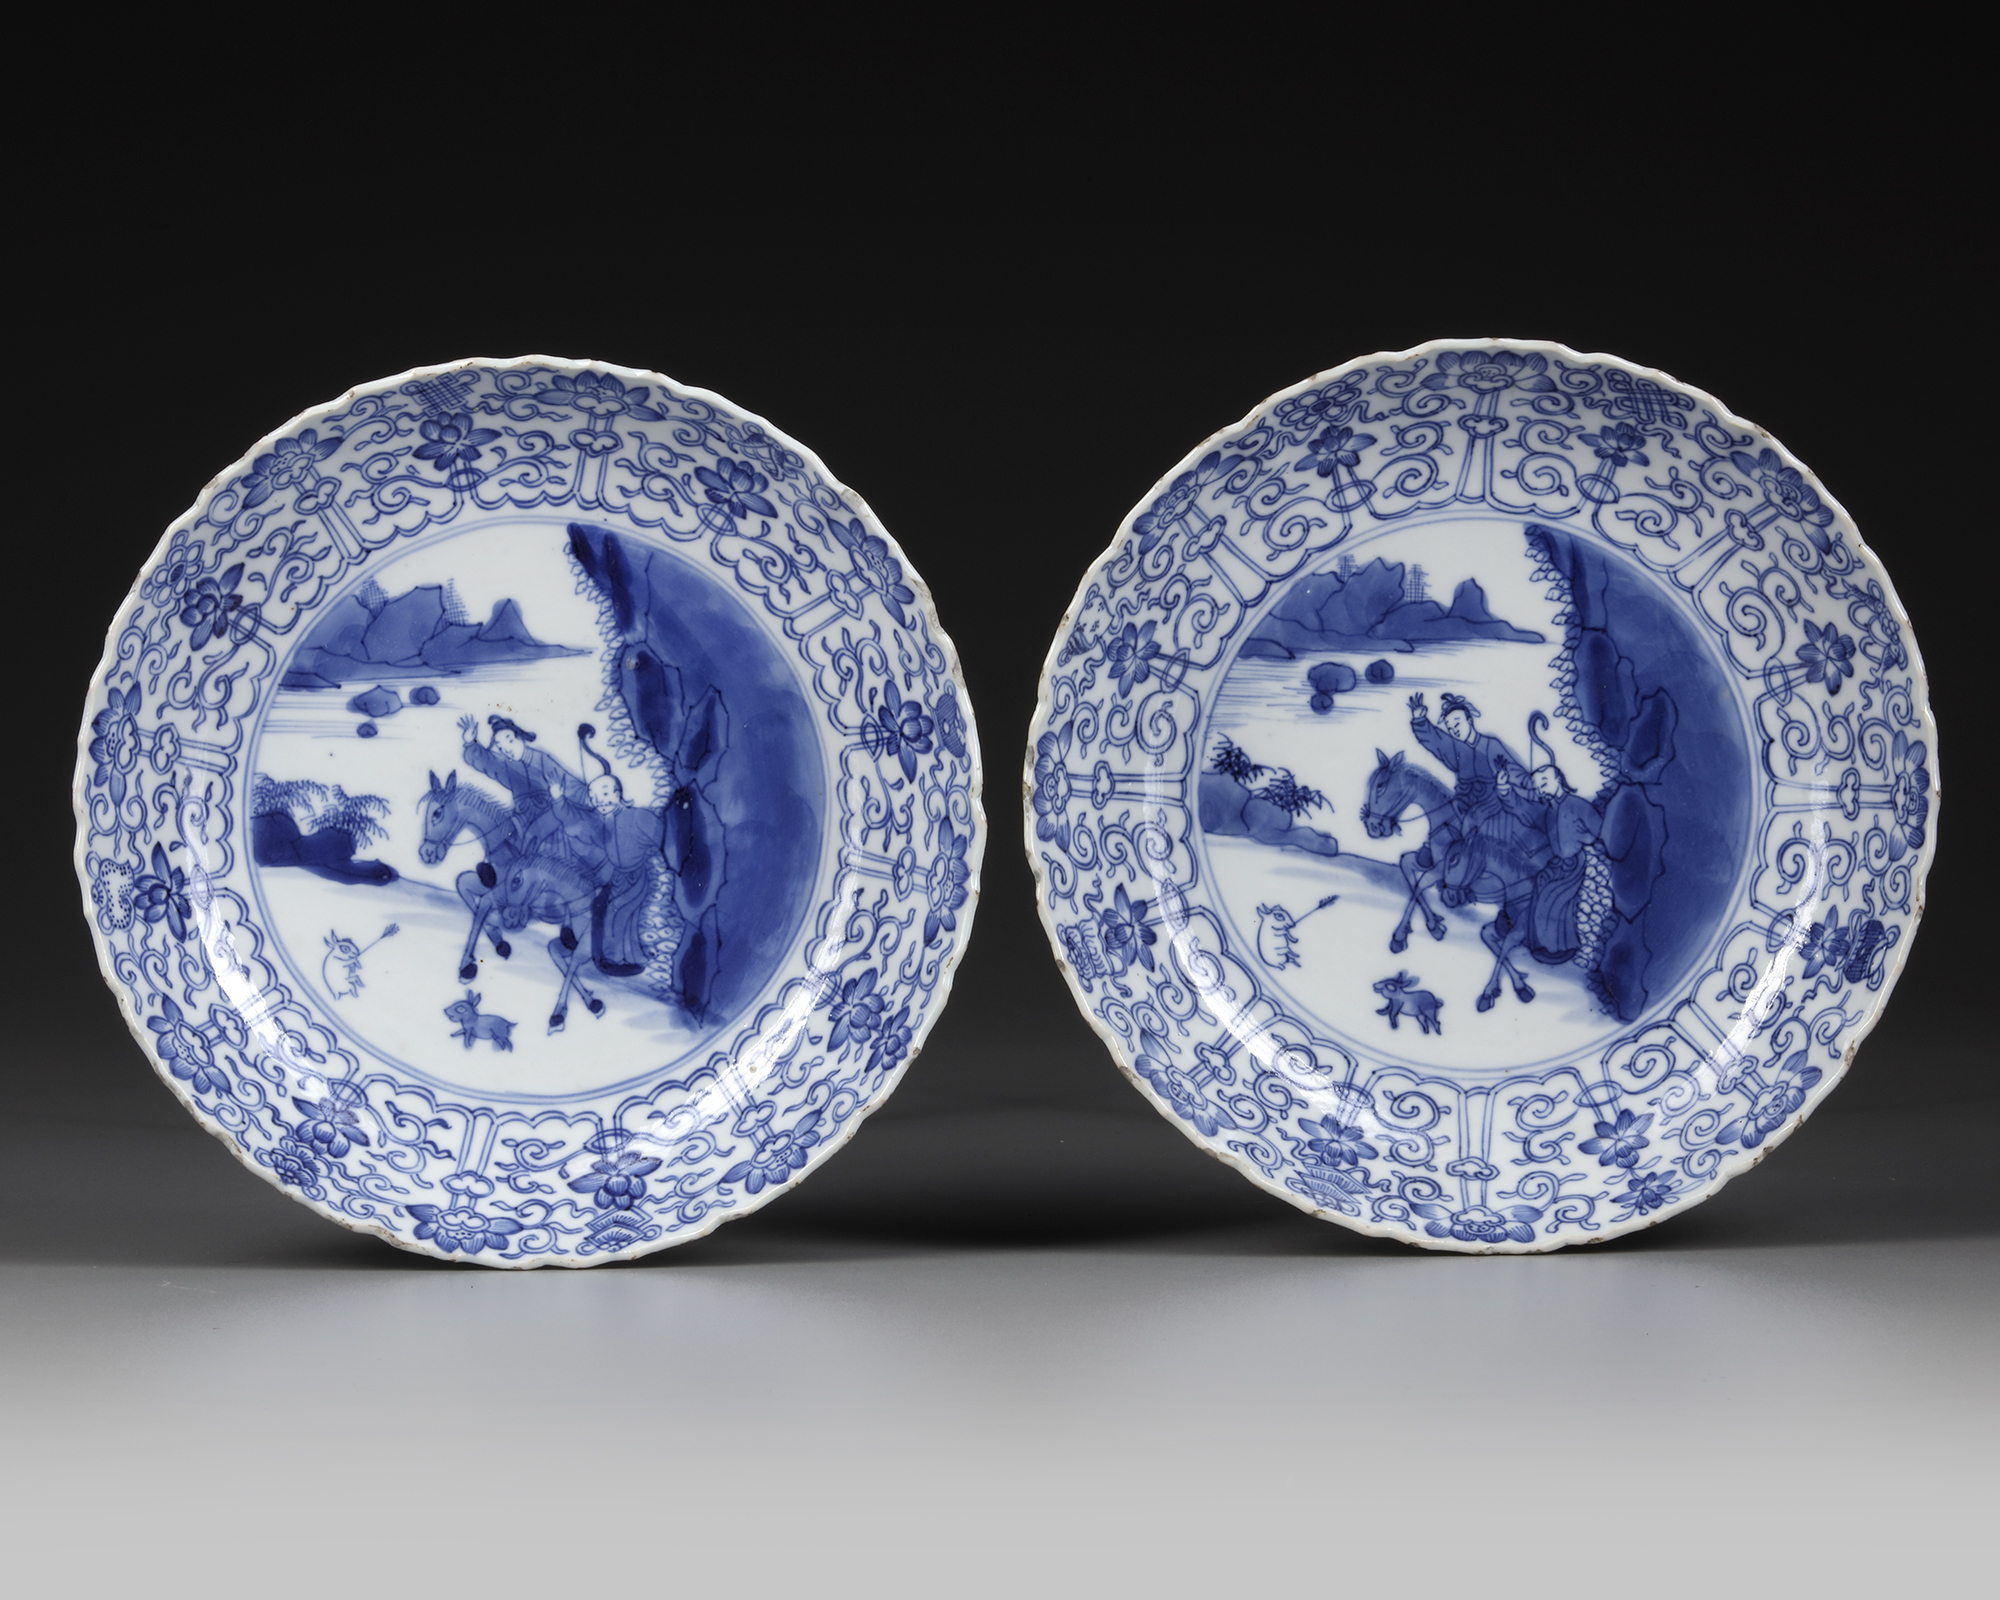 A PAIR OF CHINESE BLUE AND WHITE 'HUNTING' DISHES, KANGXI PERIOD (1662-1722)